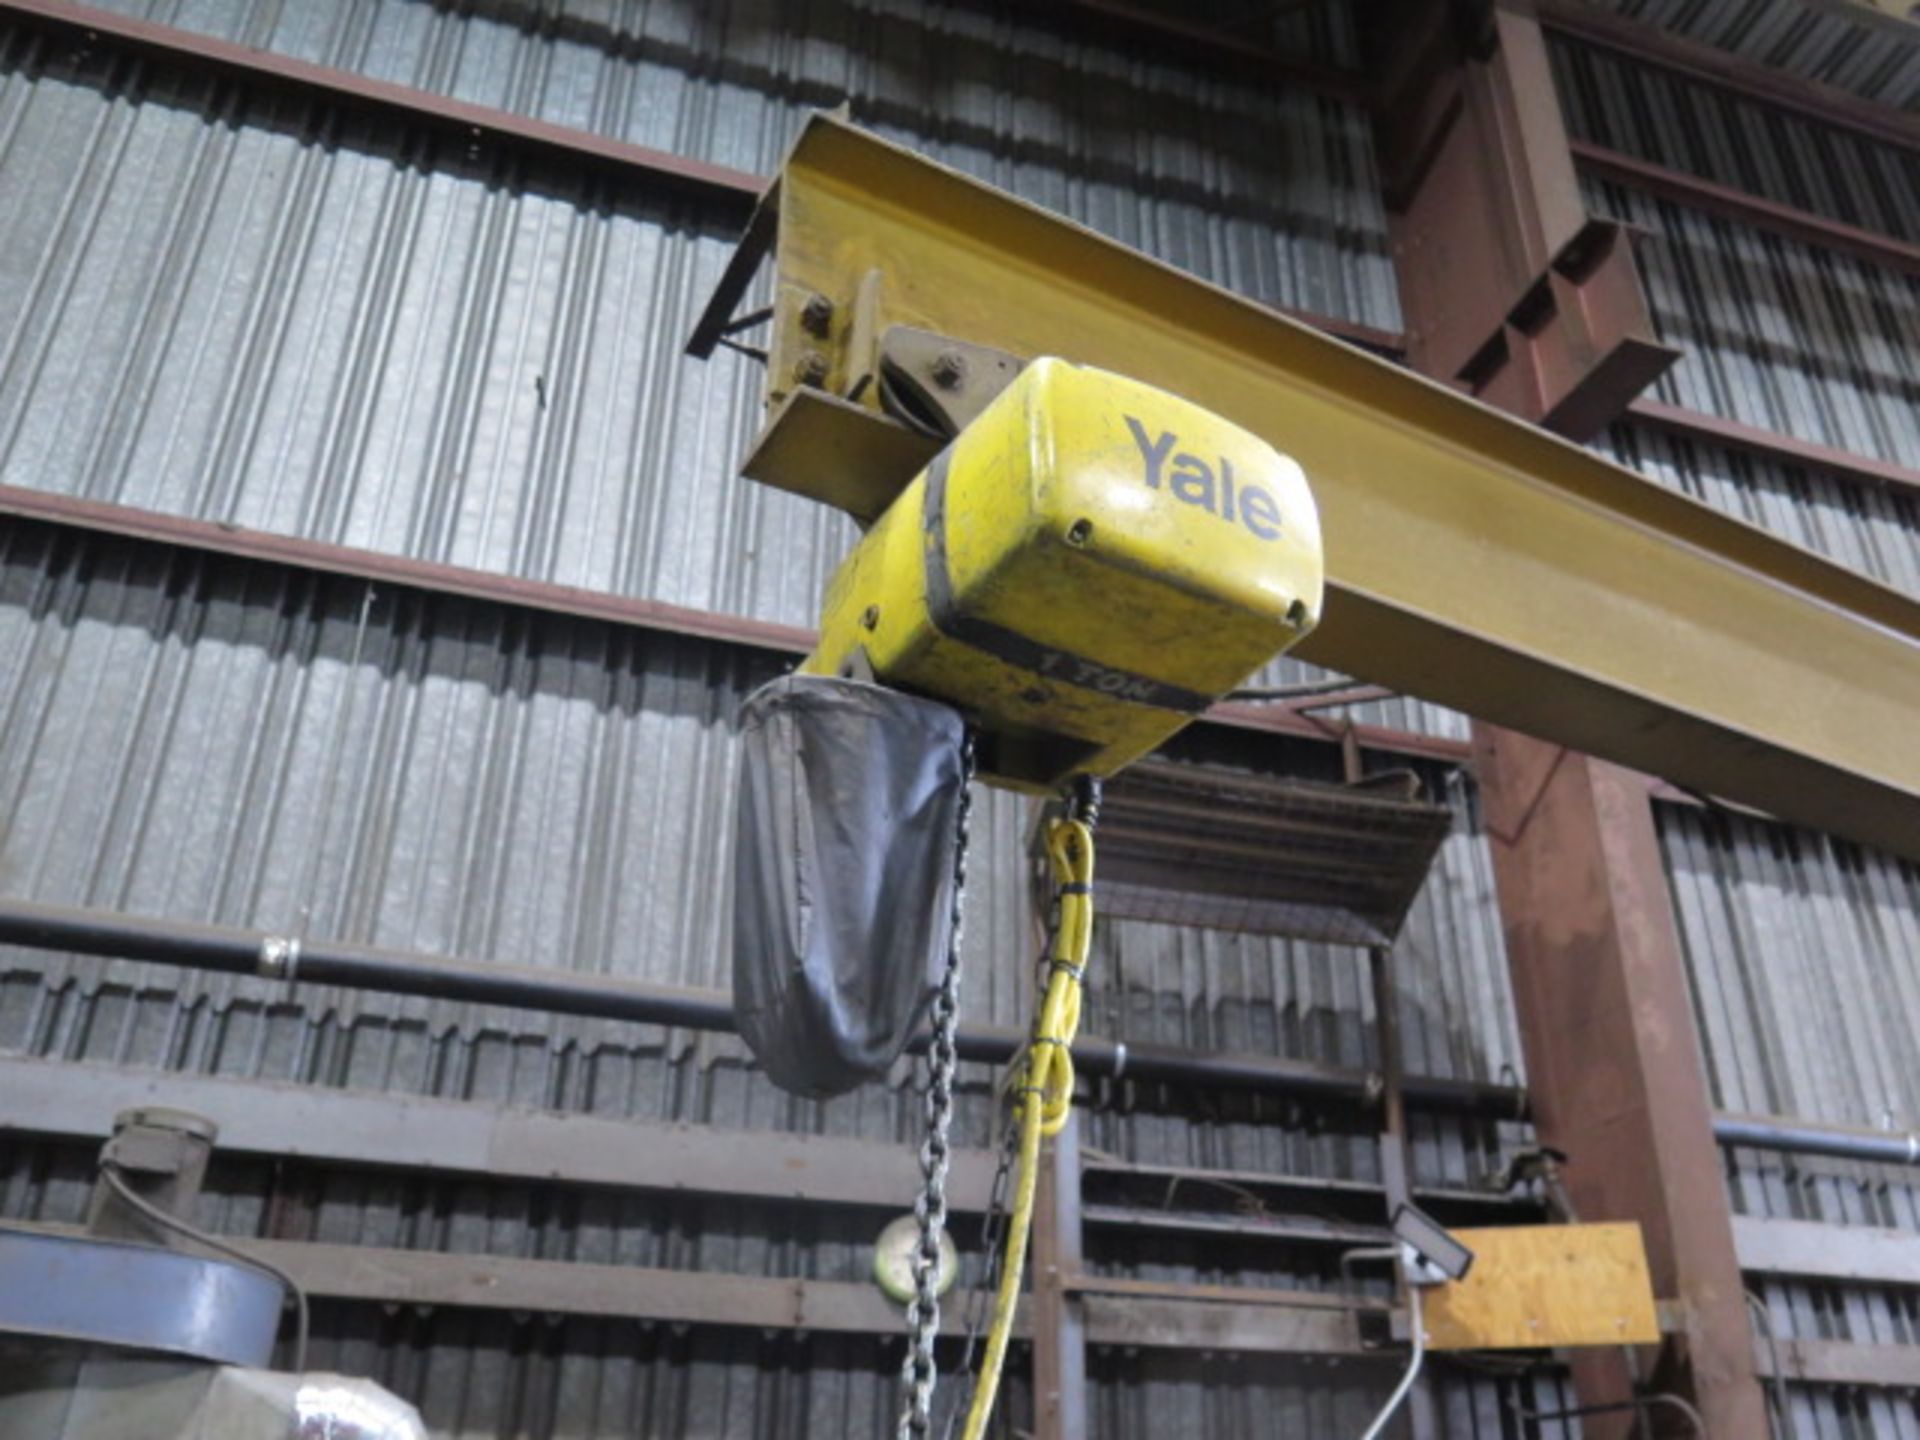 Abell-Howe 1 Ton Floor Mounted Jib Crane w/ Electric Hoist (SOLD AS-IS - NO WARRANTY) - Image 5 of 9